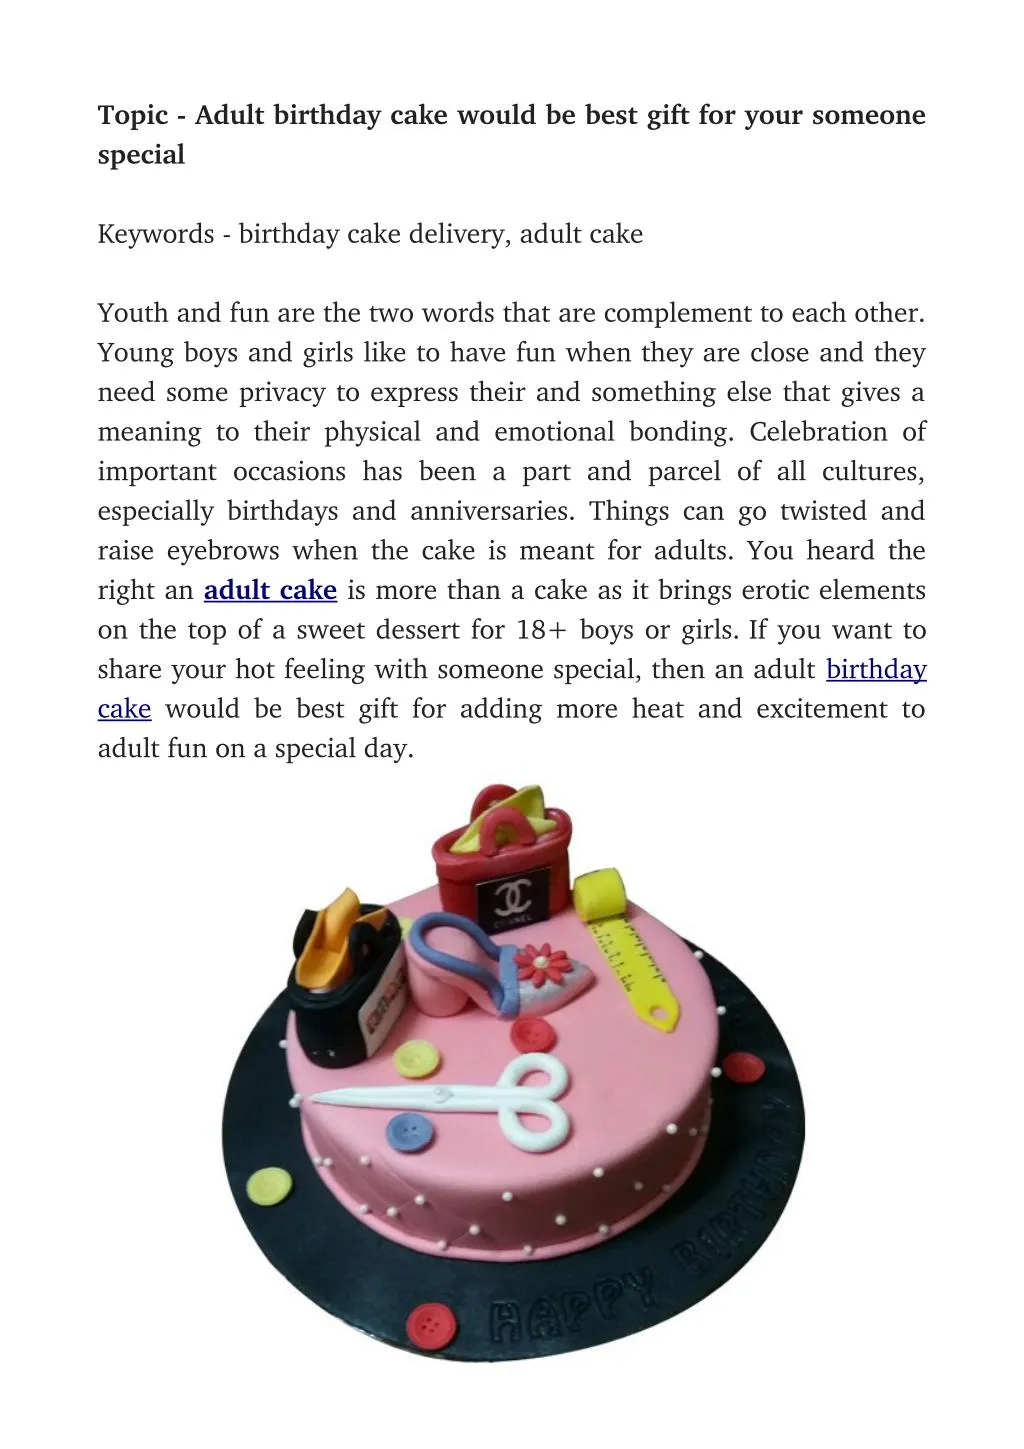 topic adult birthday cake would be best gift n.